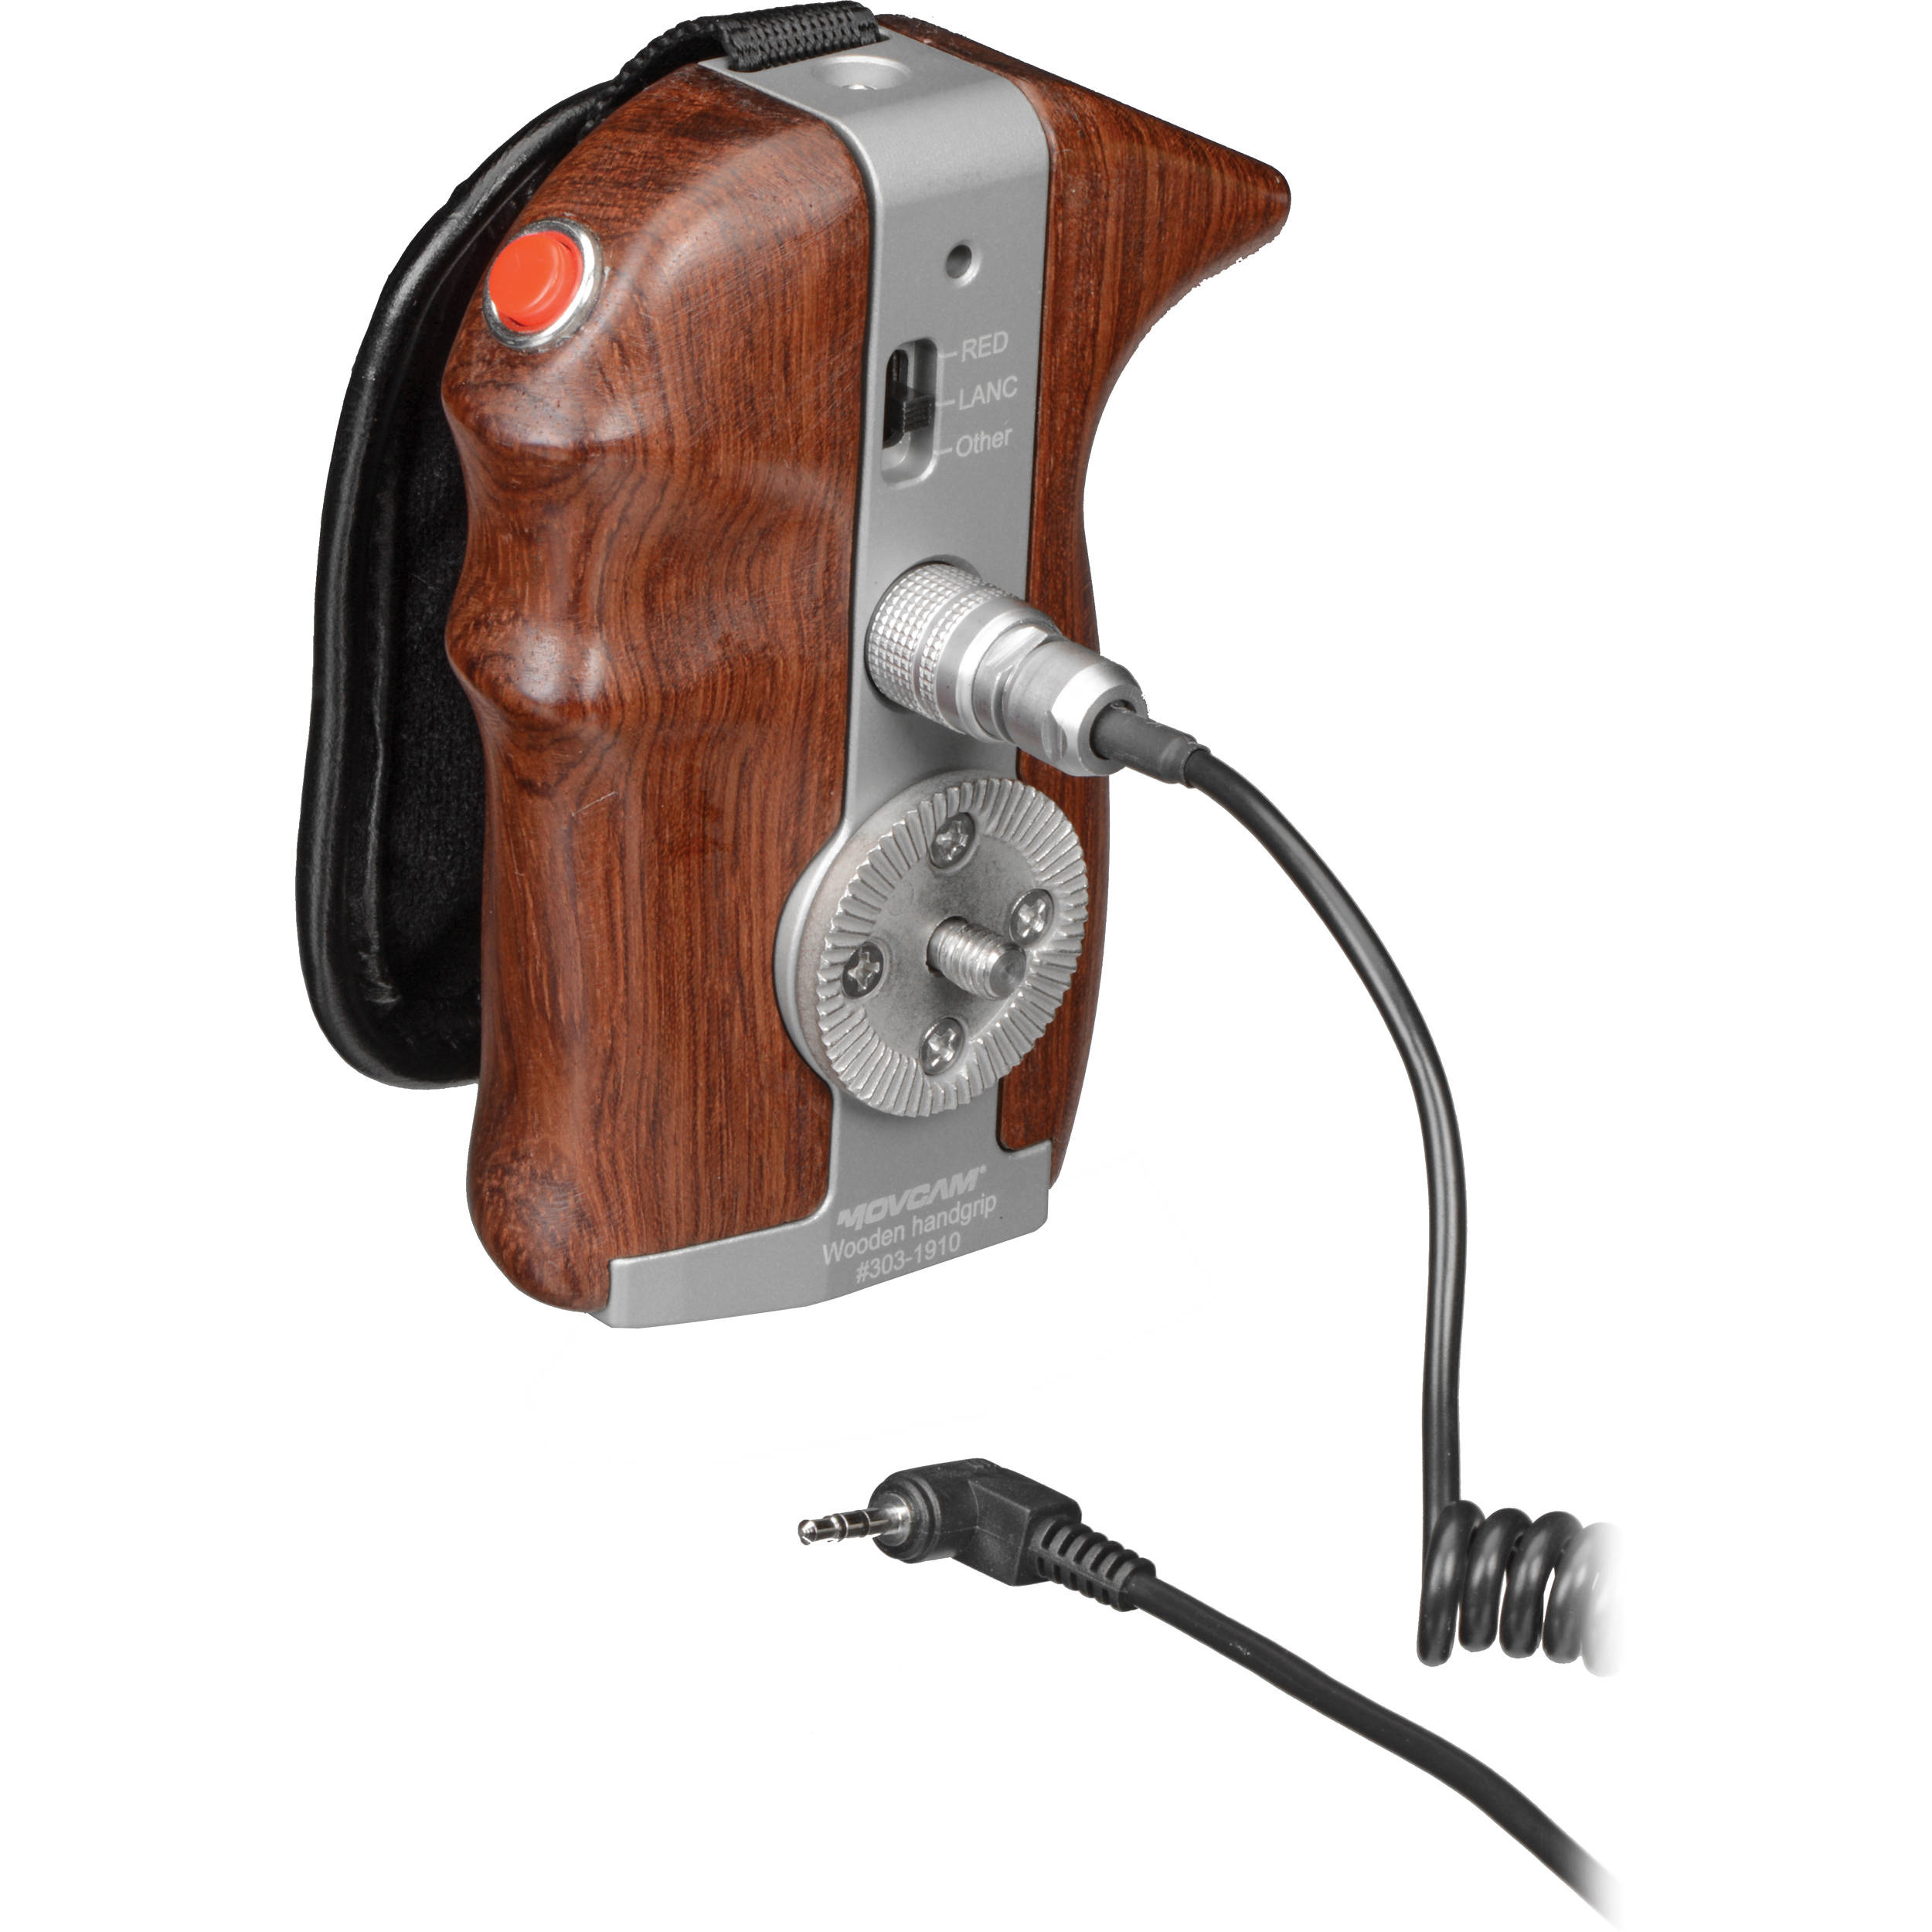 Movcam Right-Side Wooden Handgrip with VTR On/Off Trigger Switch